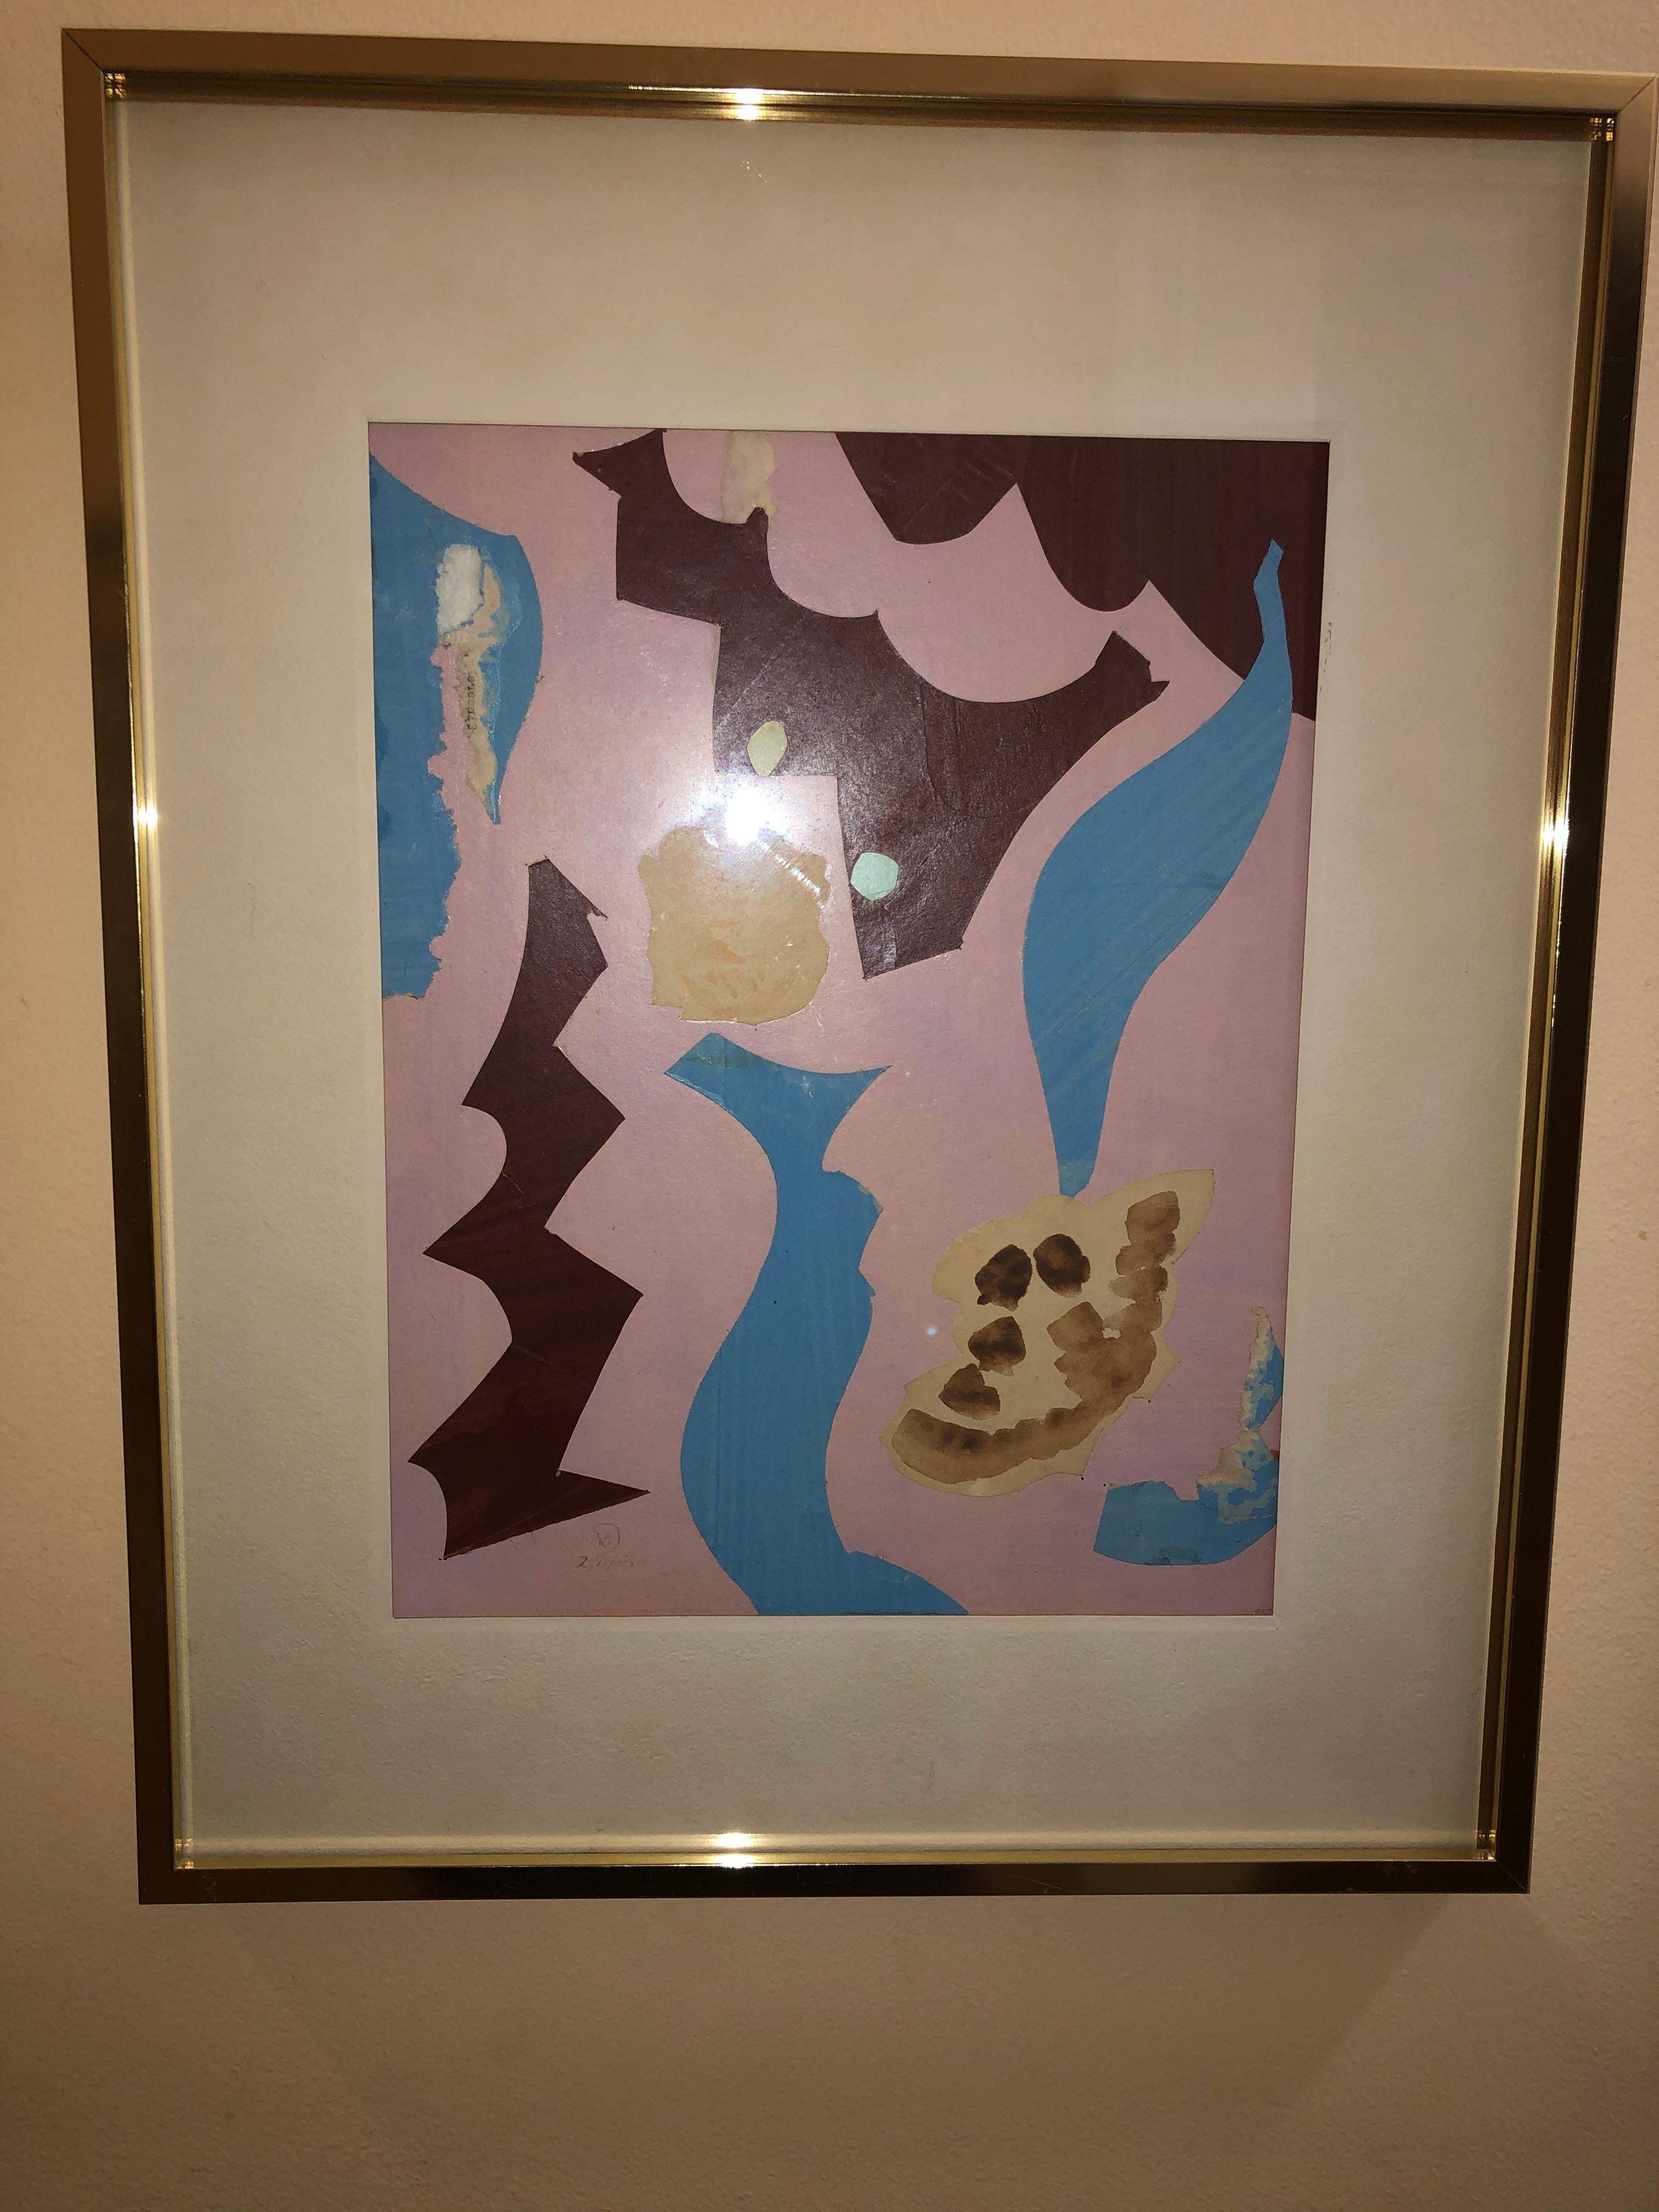 William Horace Littlefield: 1902-1969. Well listed American Modernist. He studied under Hans Hoffman and is known for these abstract mixed medium paintings. He has auction result high over $14000. This fabulous piece has vivid pink and blue colors .